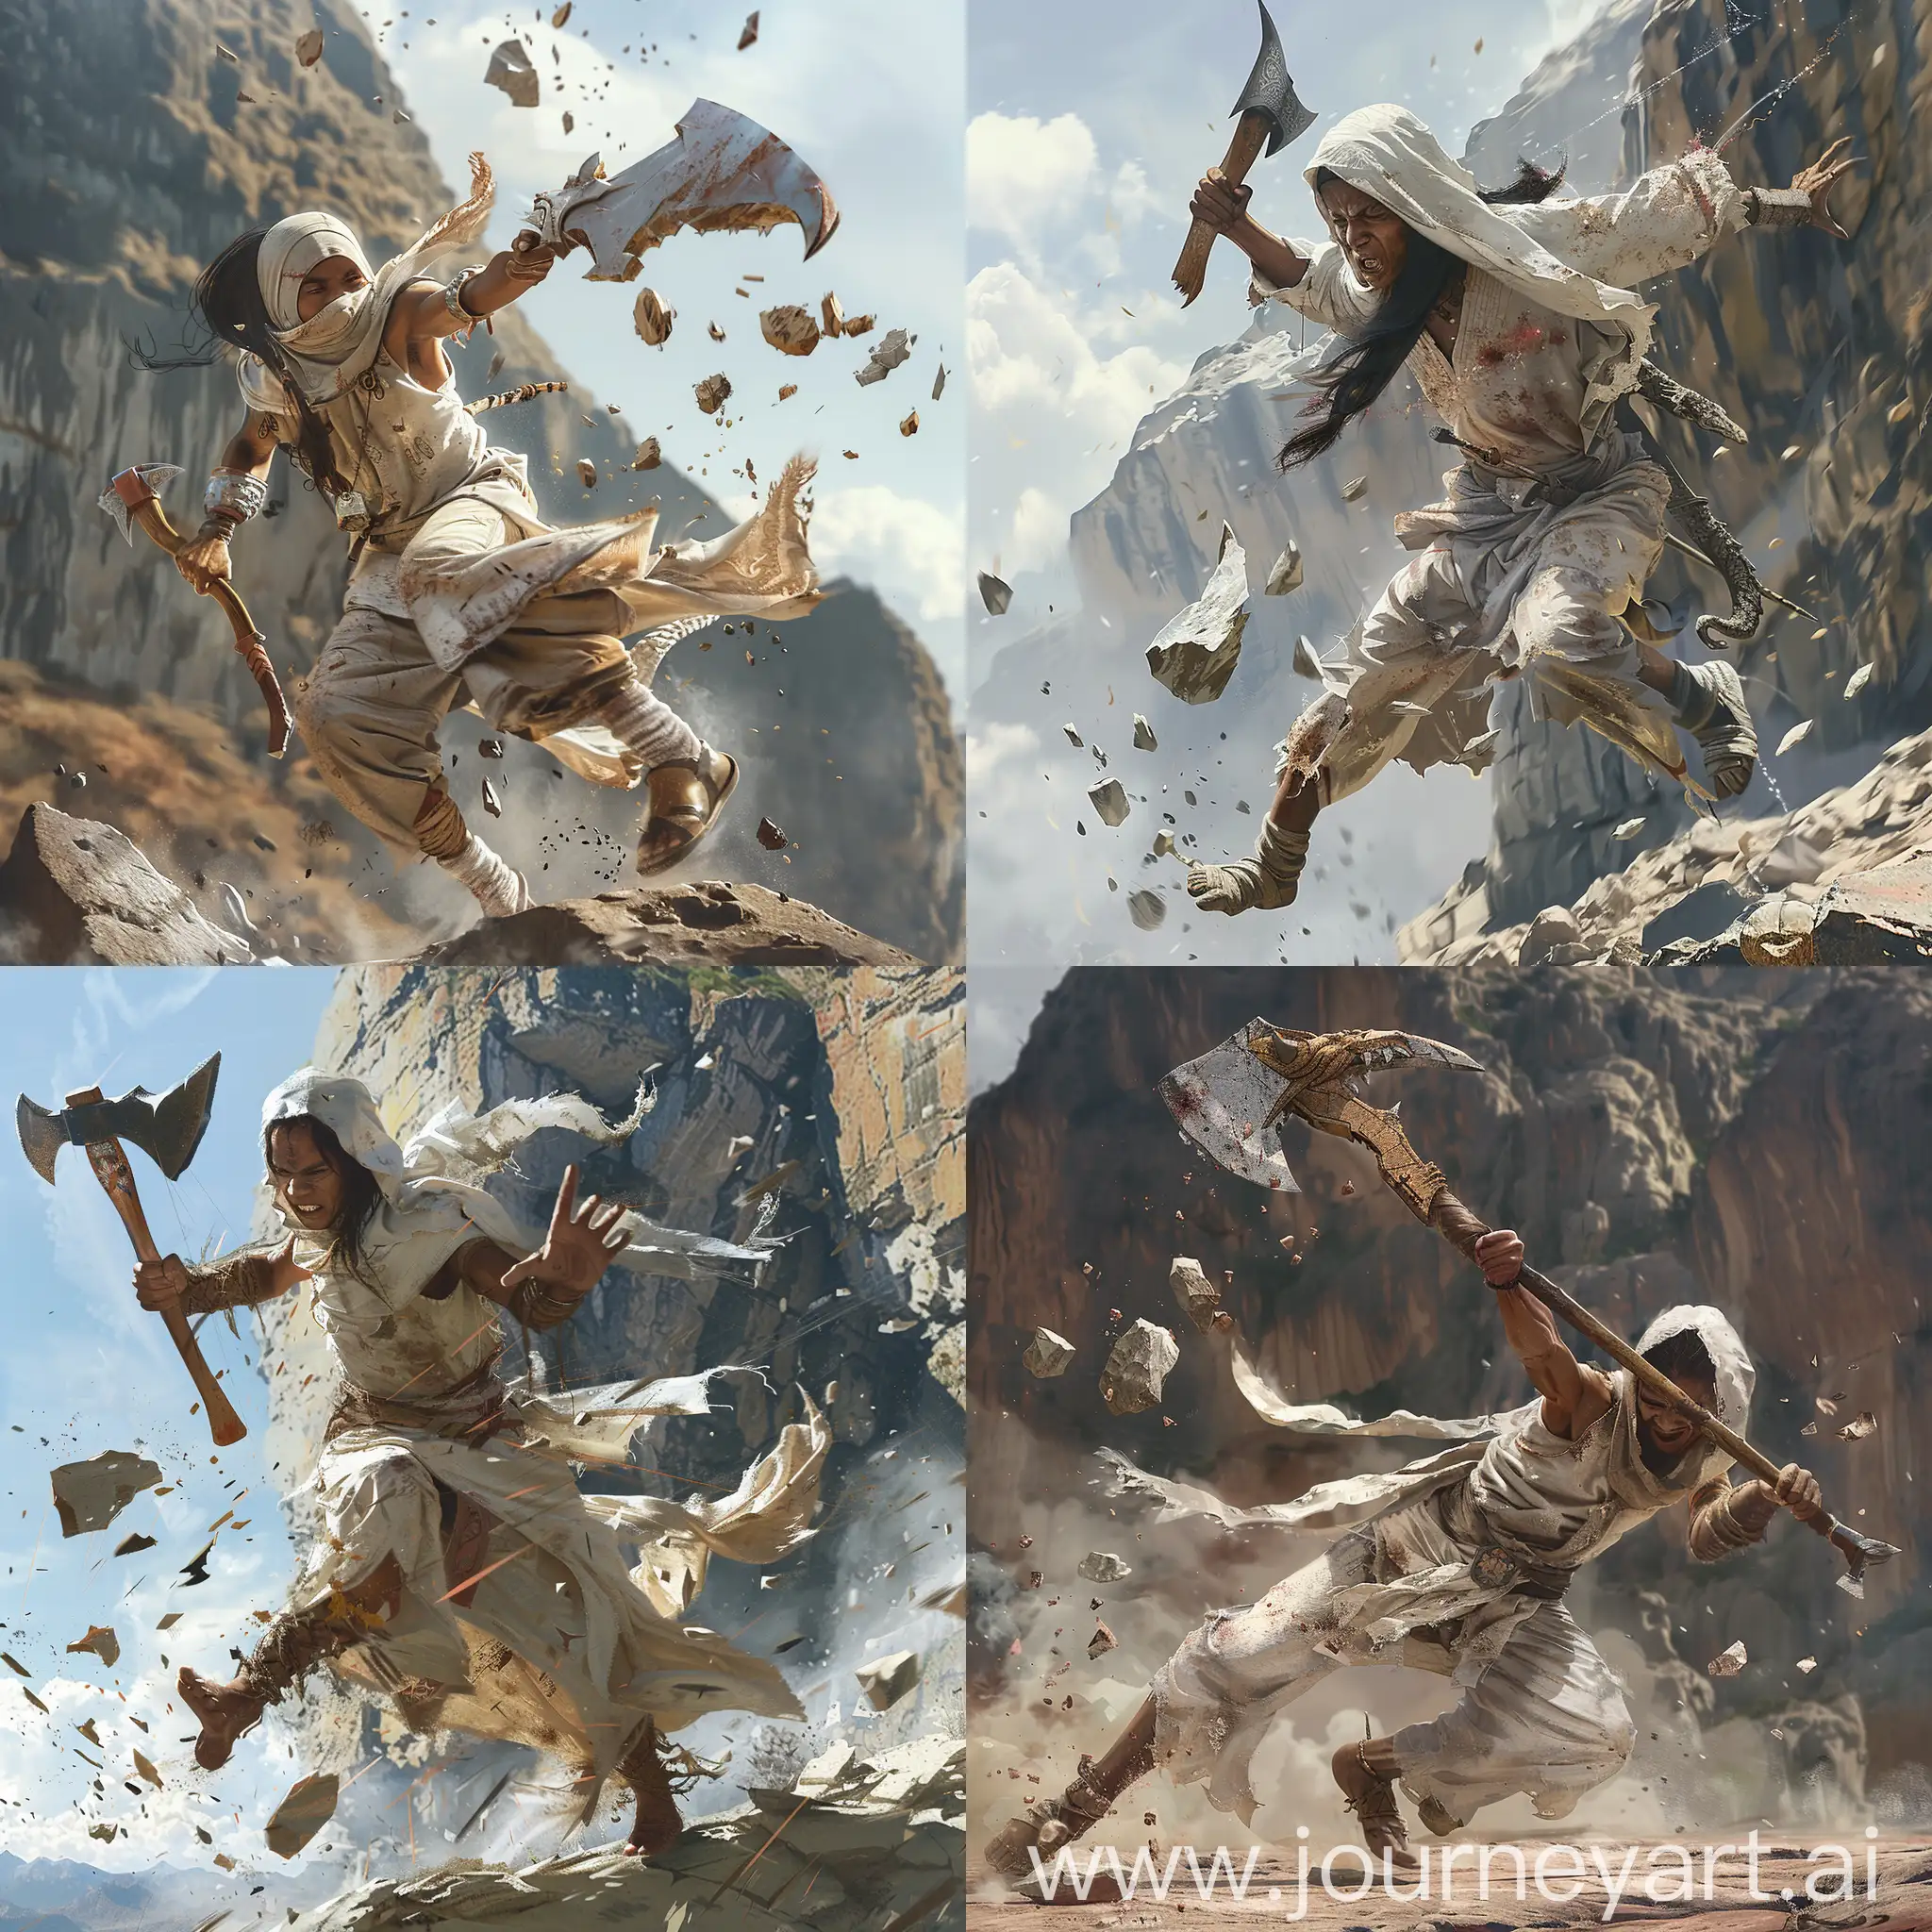 Indonesian-Warrior-Leaping-with-Dragon-Ax-and-Sword-against-Stone-Mountain-Backdrop